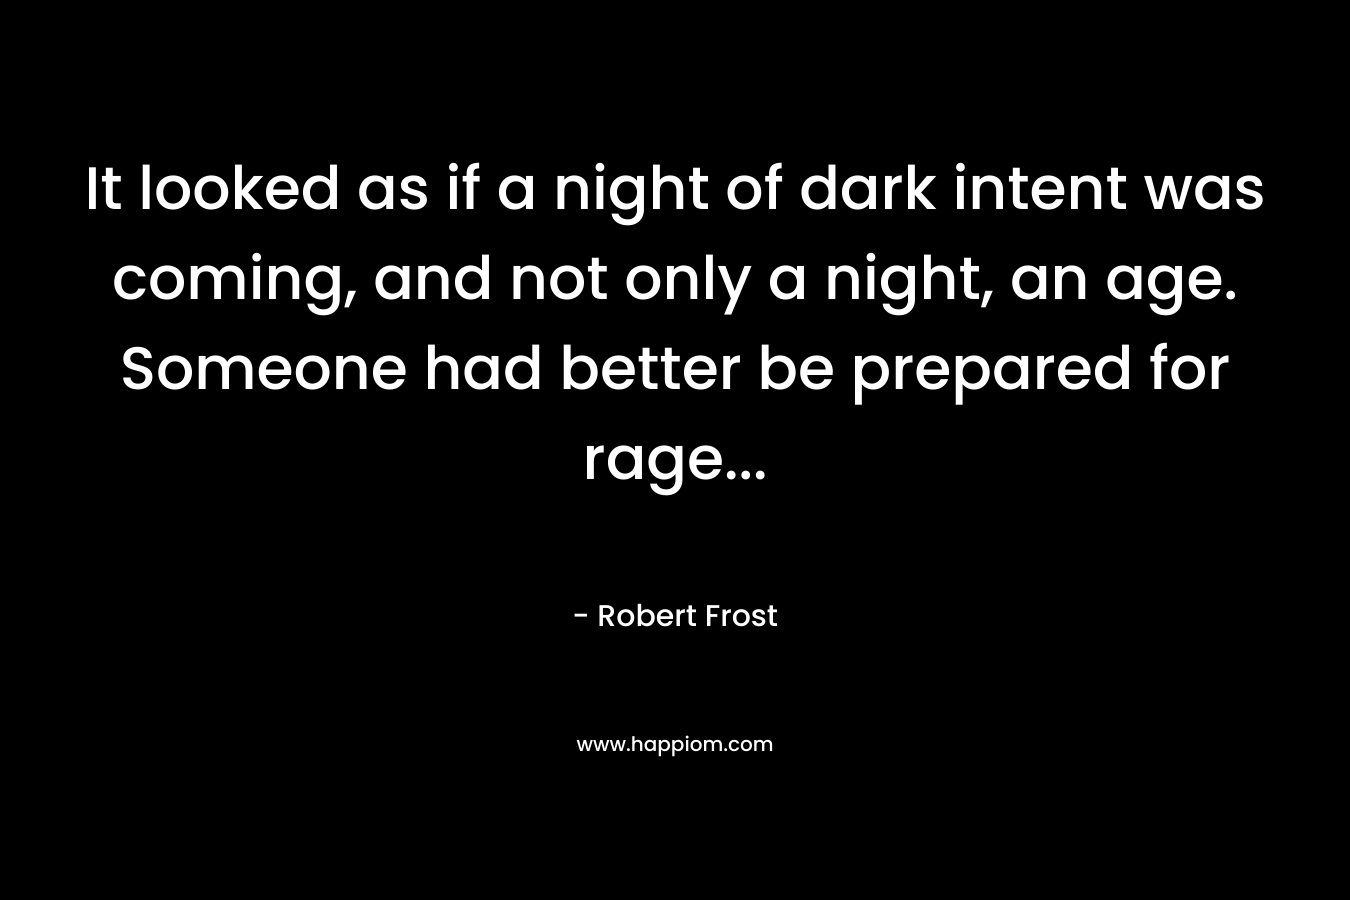 It looked as if a night of dark intent was coming, and not only a night, an age. Someone had better be prepared for rage...